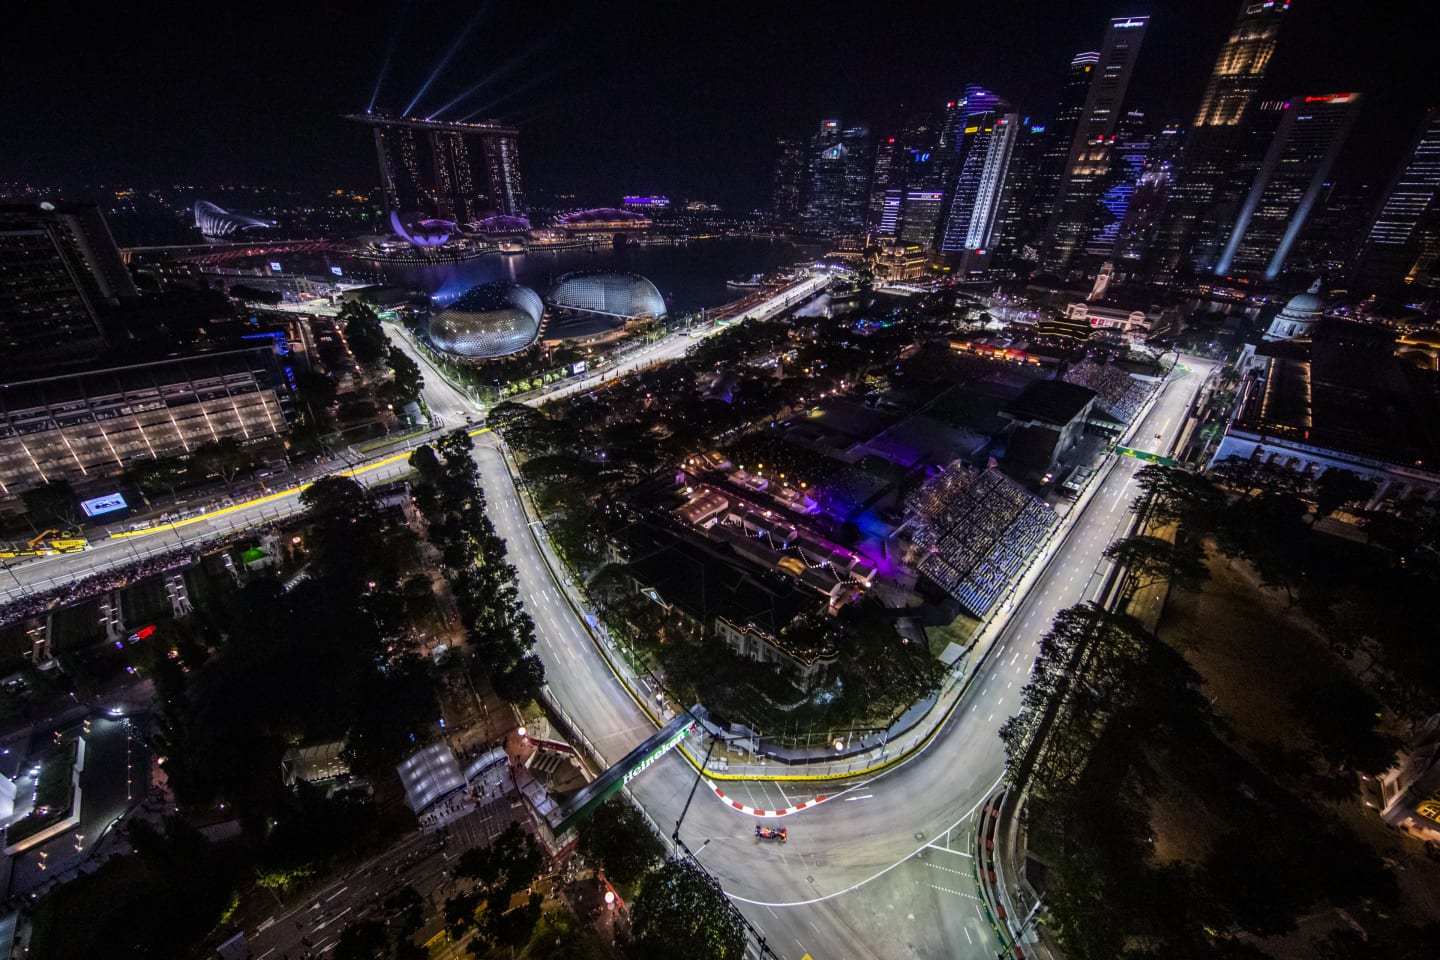 SINGAPORE, SINGAPORE - SEPTEMBER 20: Max Verstappen of the Netherlands driving the (33) Aston Martin Red Bull Racing RB15 on track during practice for the F1 Grand Prix of Singapore at Marina Bay Street Circuit on September 20, 2019 in Singapore. (Photo by Mark Thompson/Getty Images)